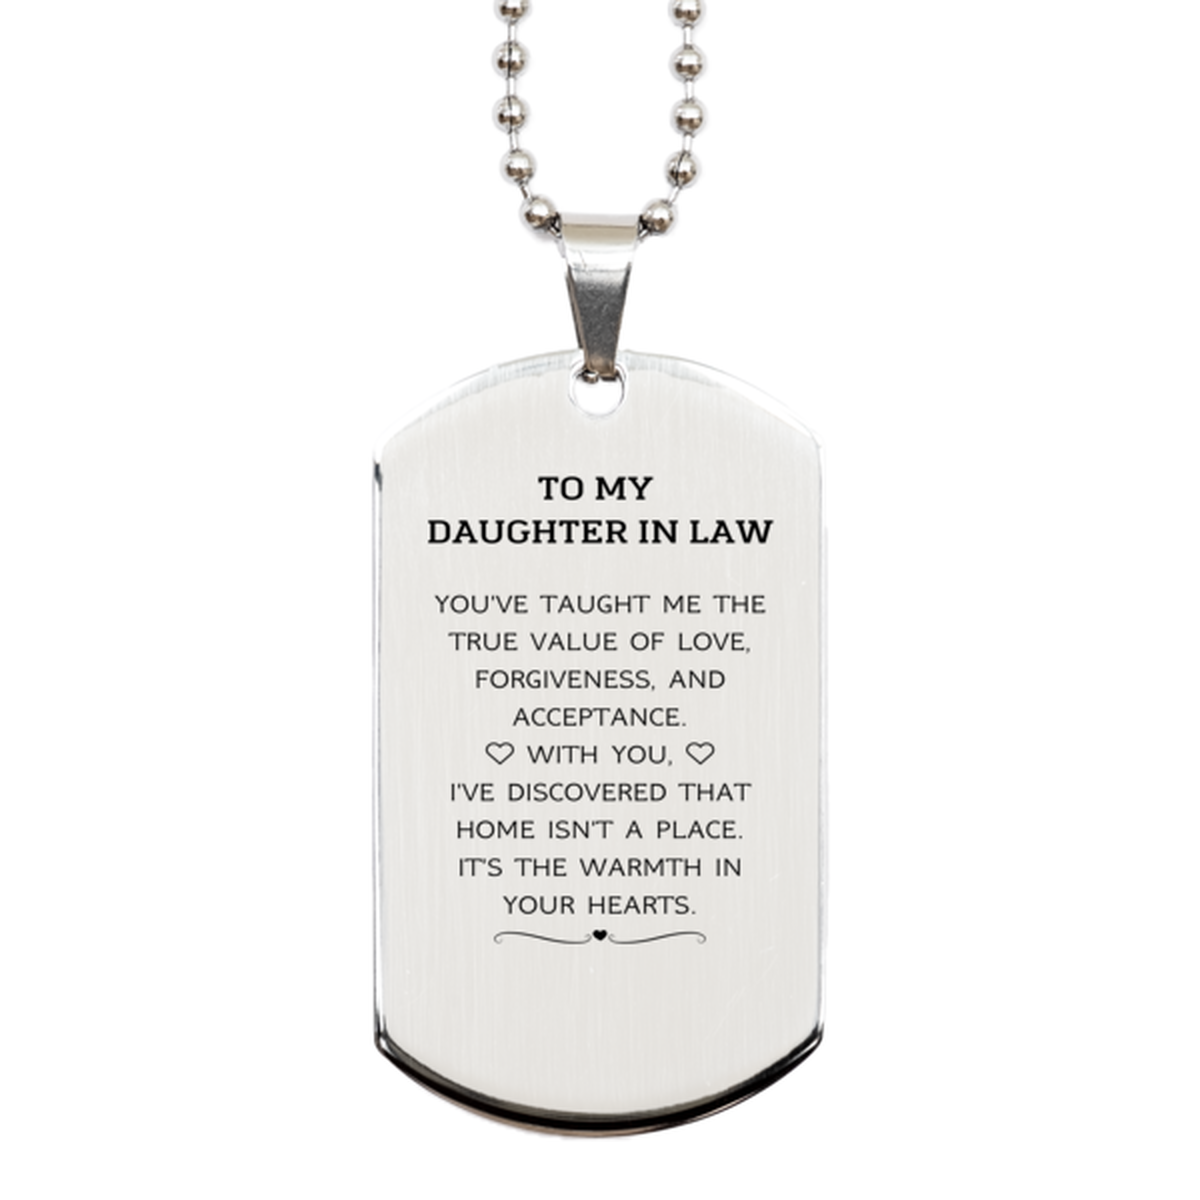 To My Daughter In Law Gifts, You've taught me the true value of love, Thank You Gifts For Daughter In Law, Birthday Silver Dog Tag For Daughter In Law